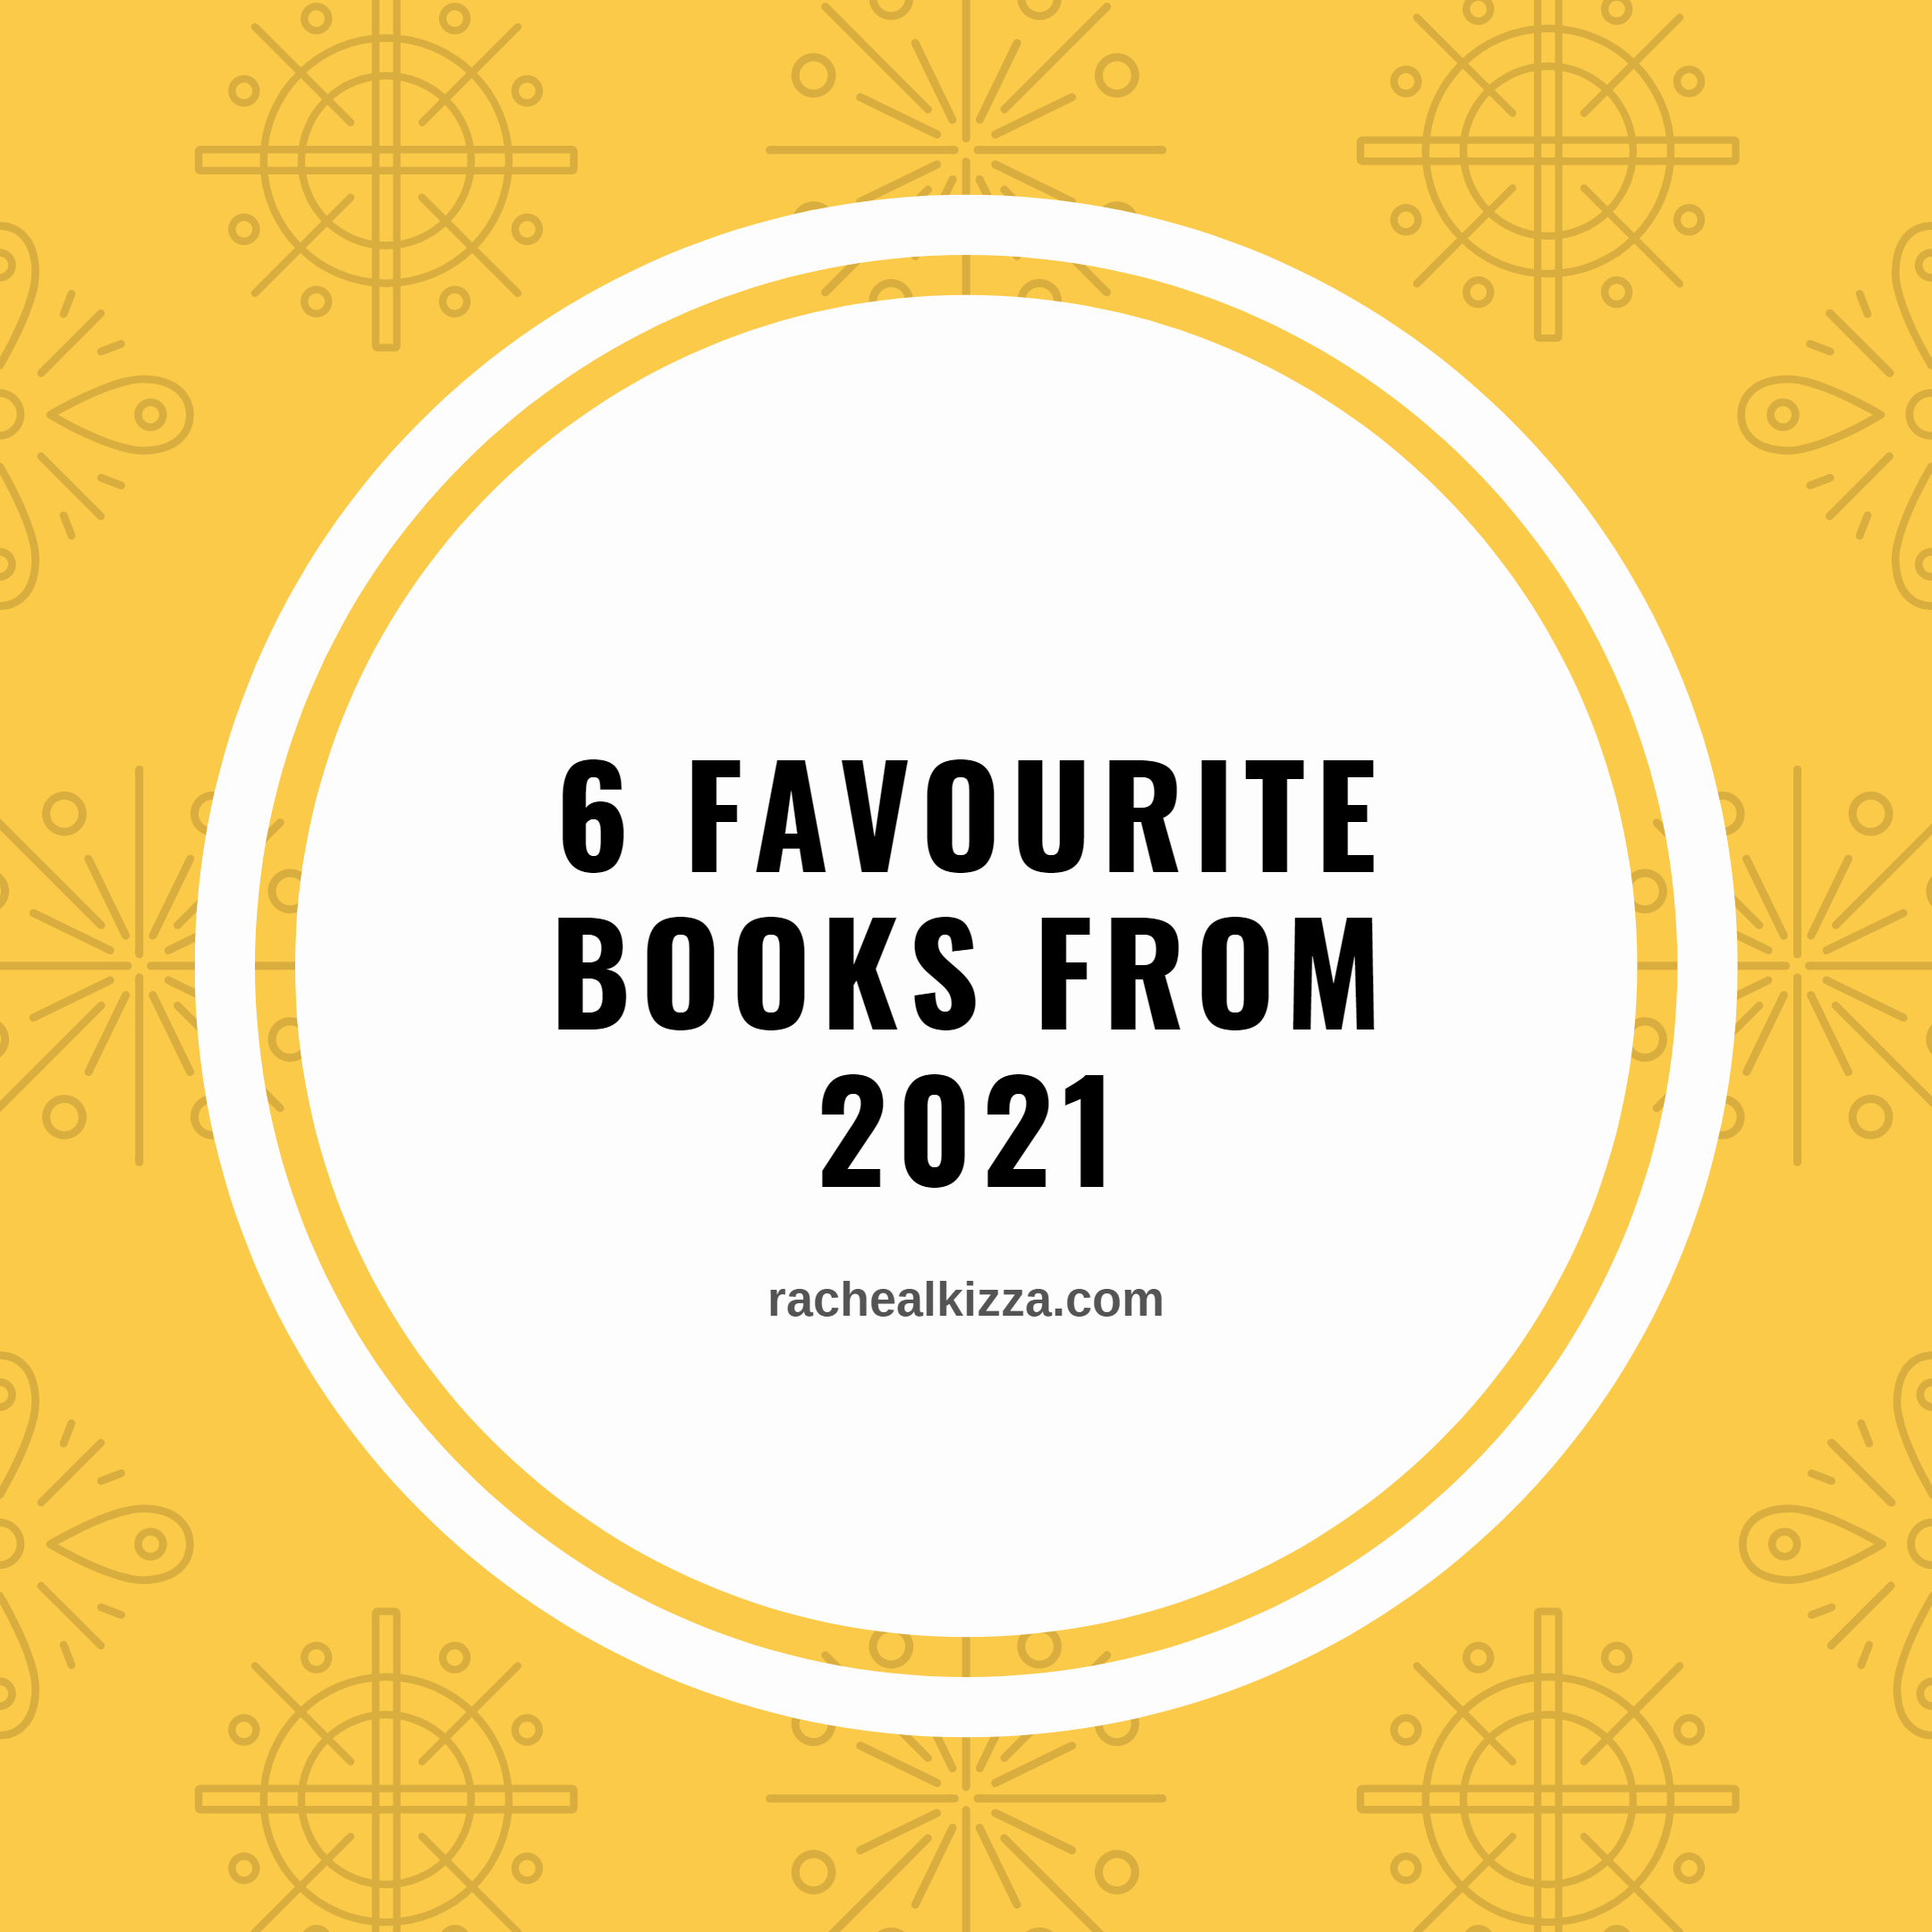 Favourite books from 2021